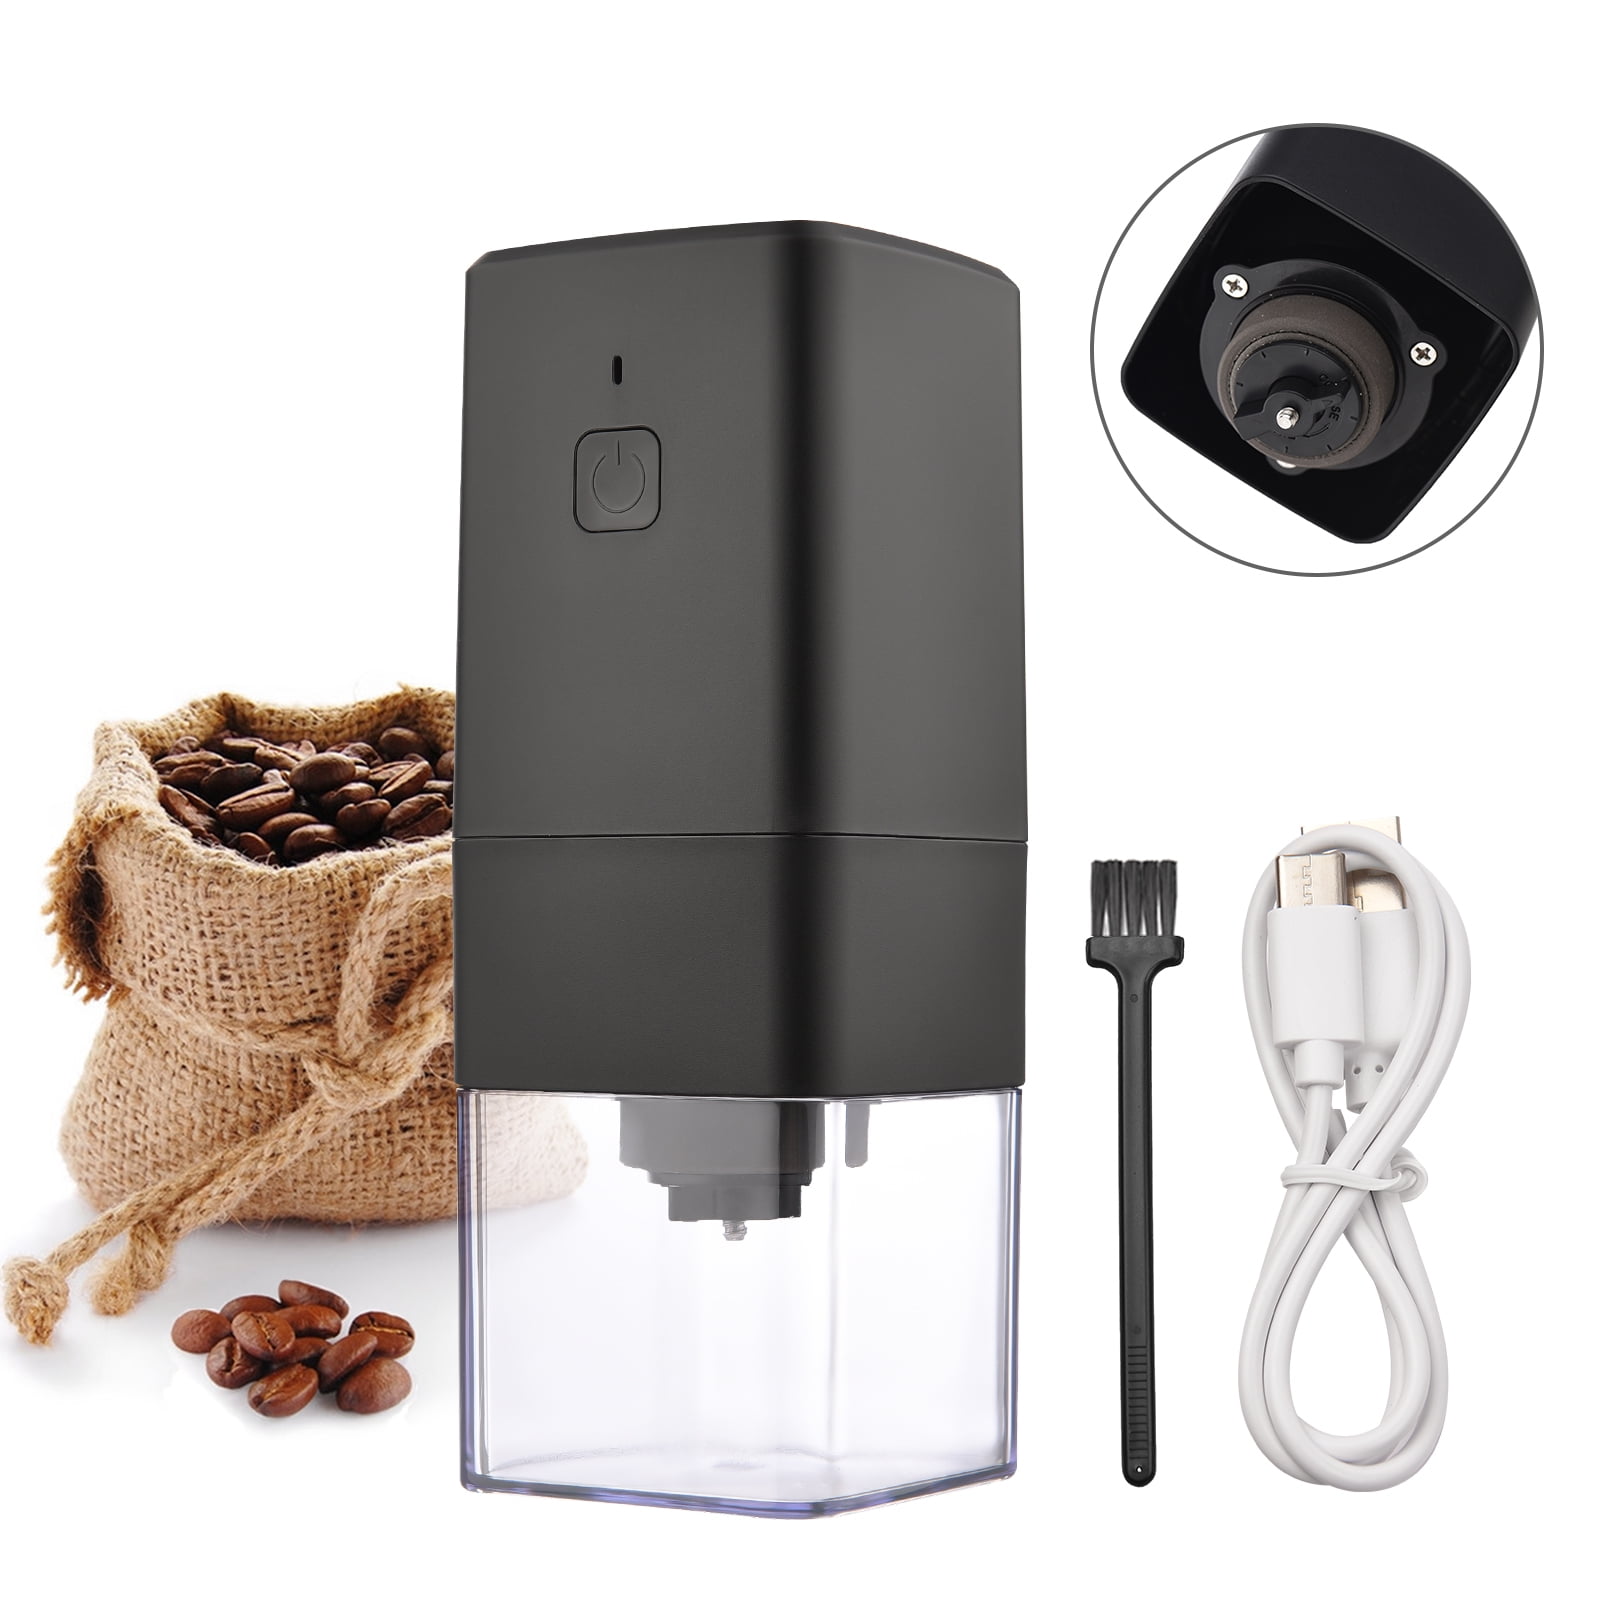 Portable Electric Coffee Grinder for Beans, Spices and More, Burr Grinder,  Quieter, Adjustable Coarse and Fine Grinding, USB Rechargeable, Removable